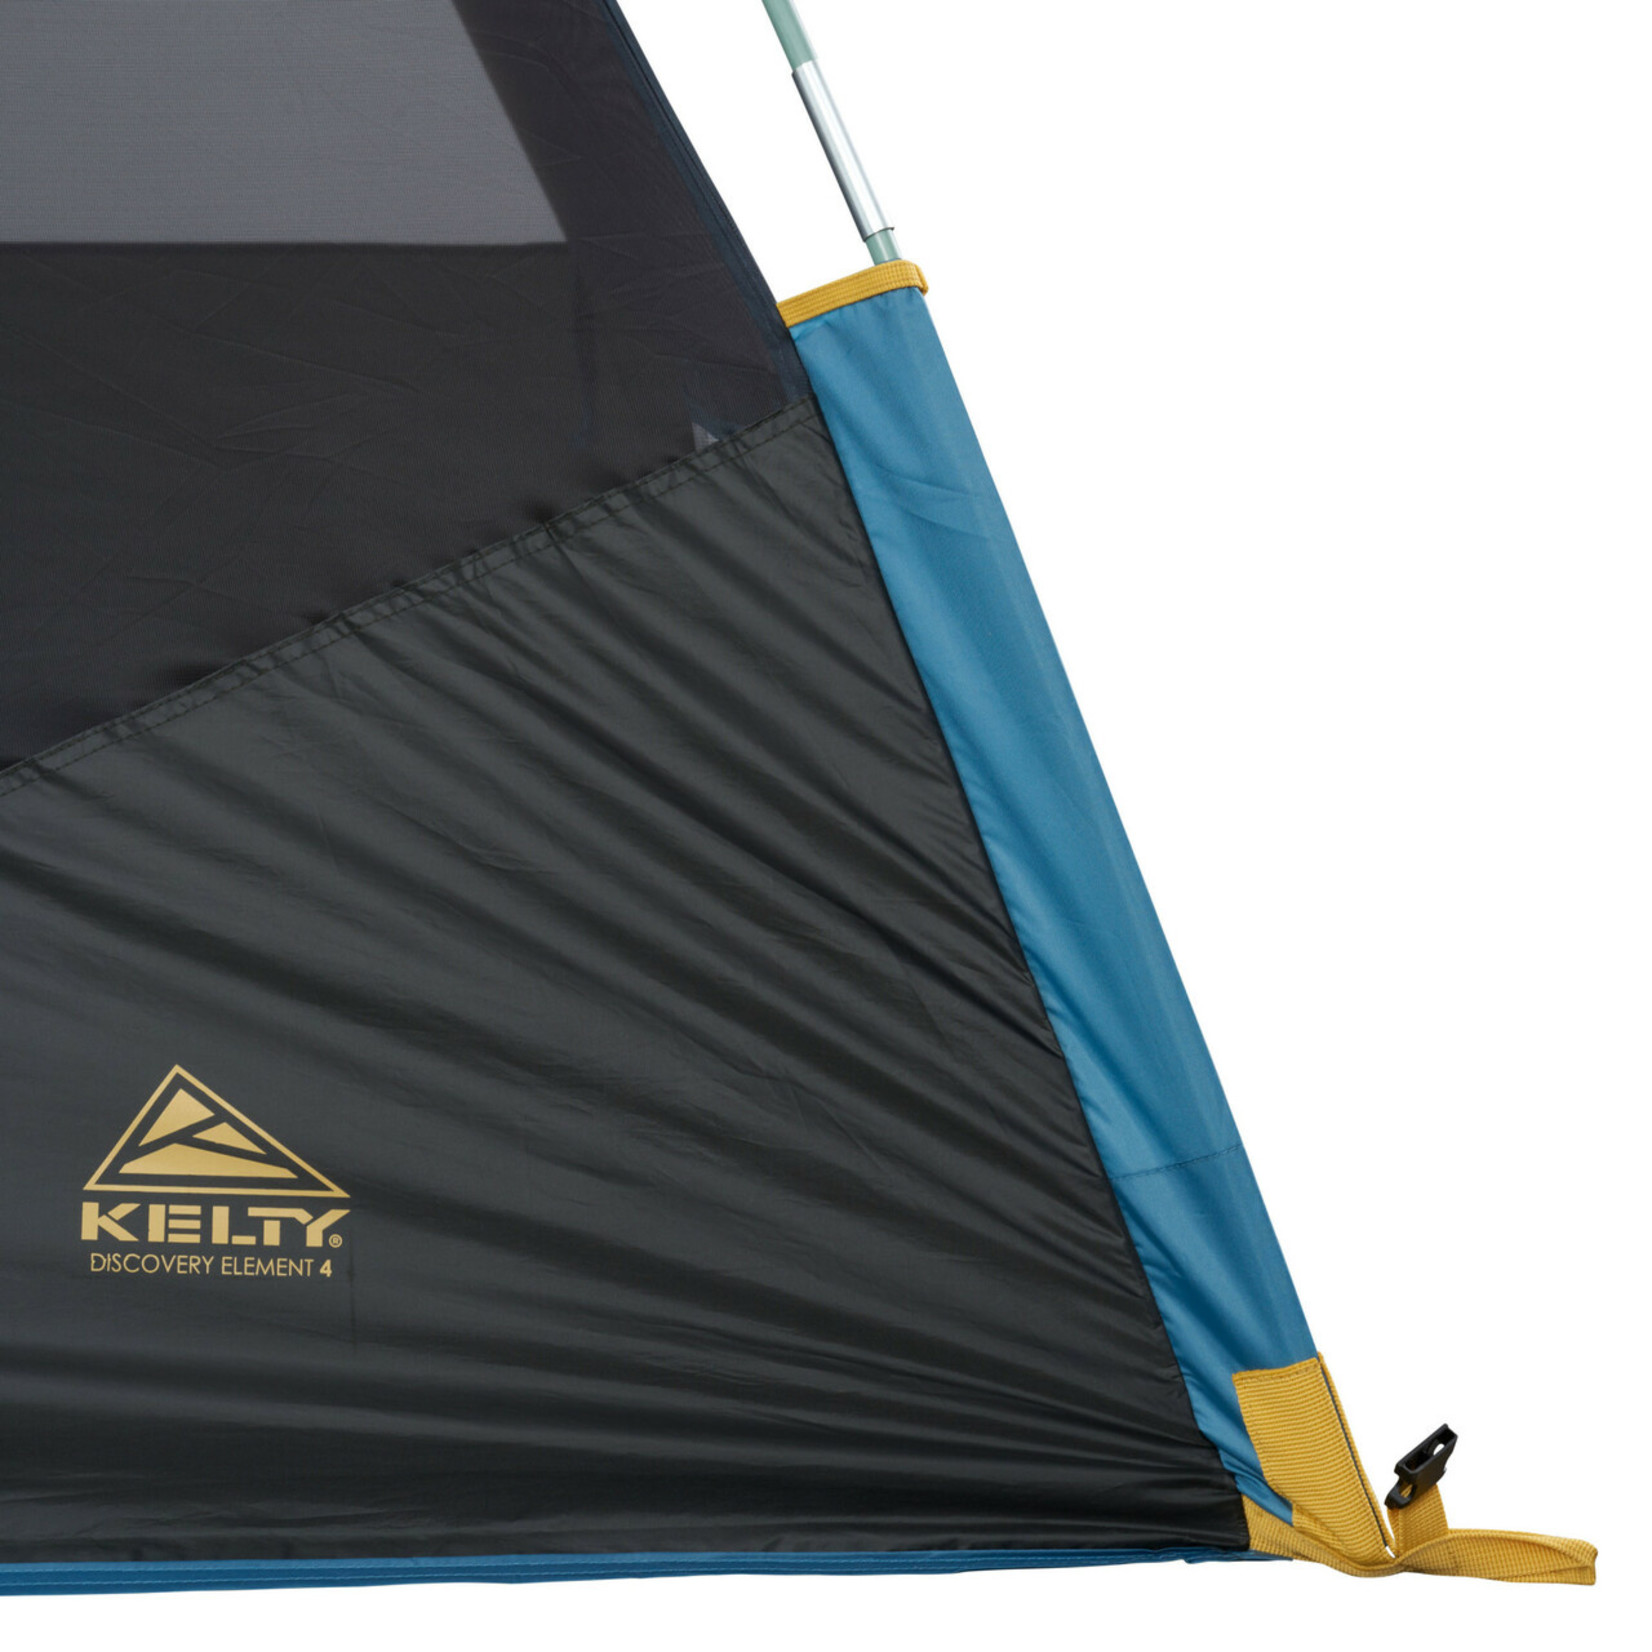 Kelty Kelty Discovery Element 4 Tent